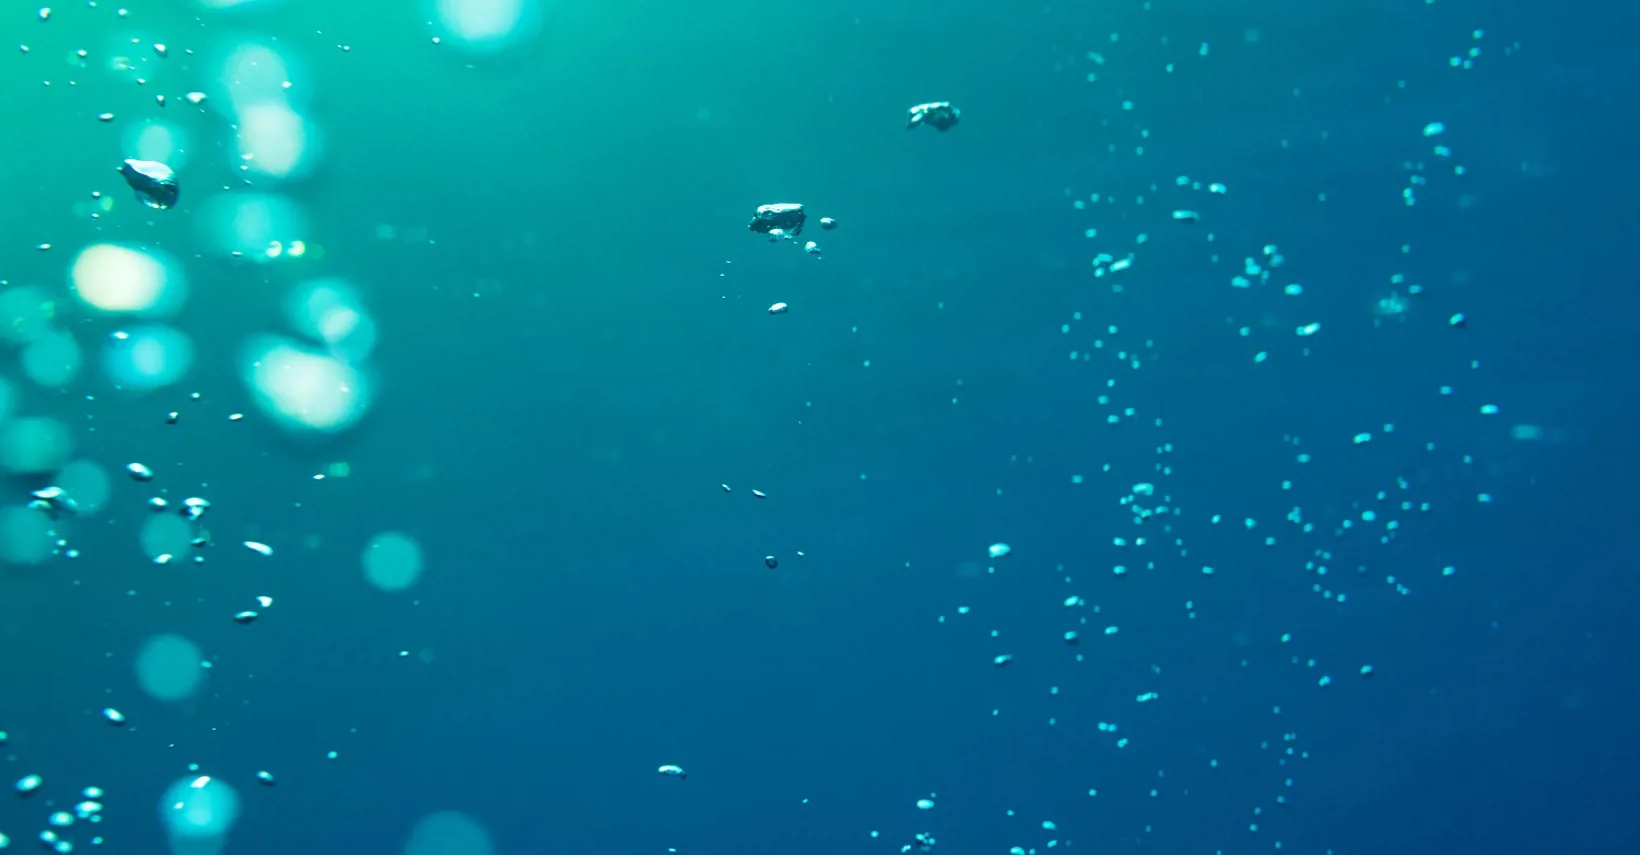 Underwater air bubbles moving upwards